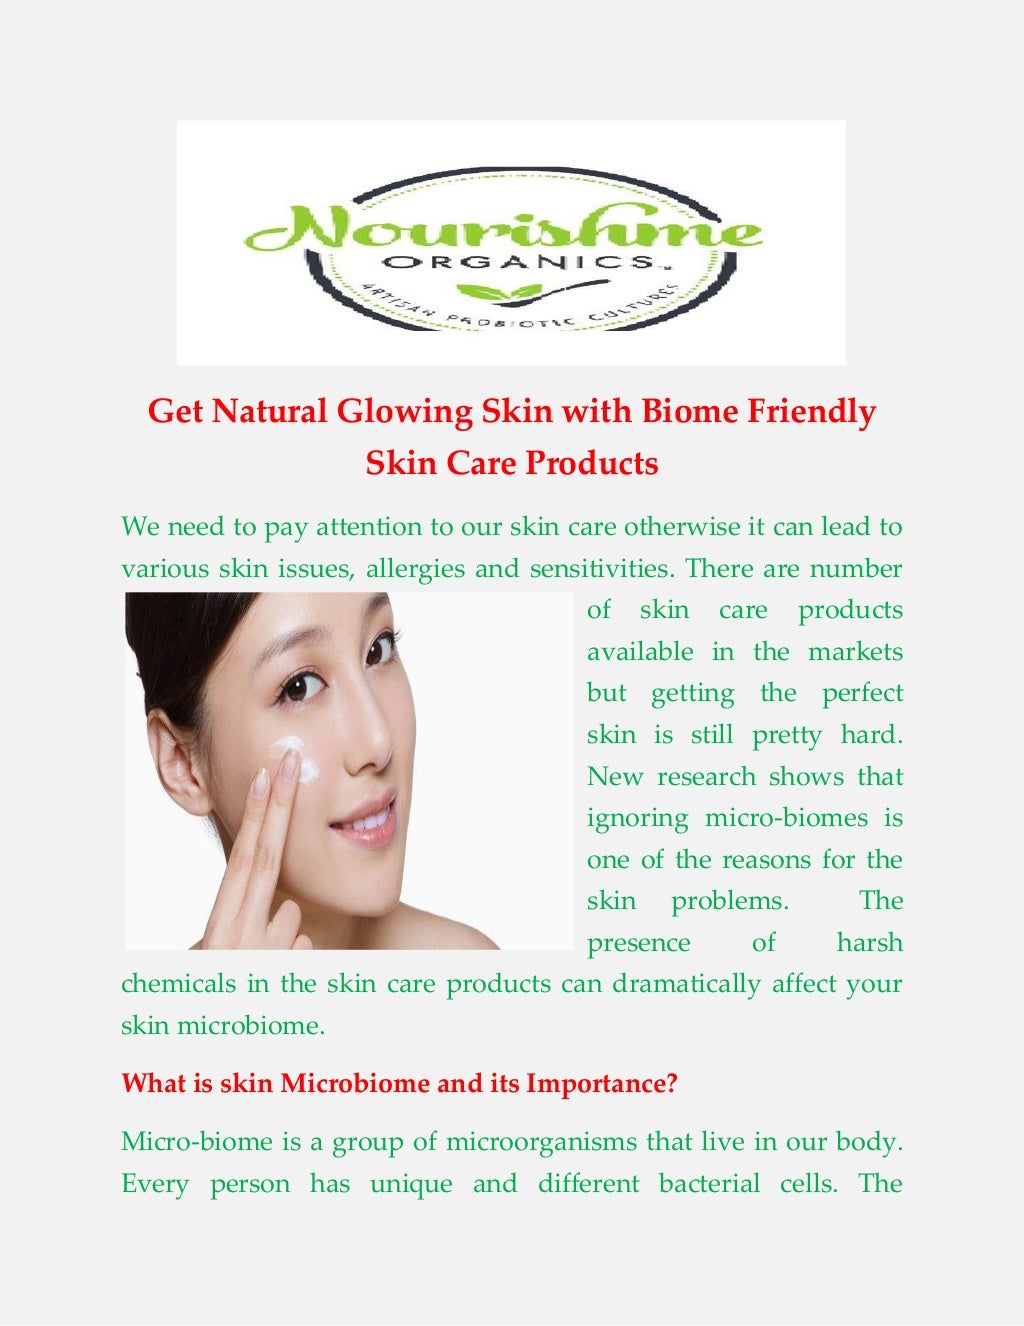 Biome Friendly Skin Care Products